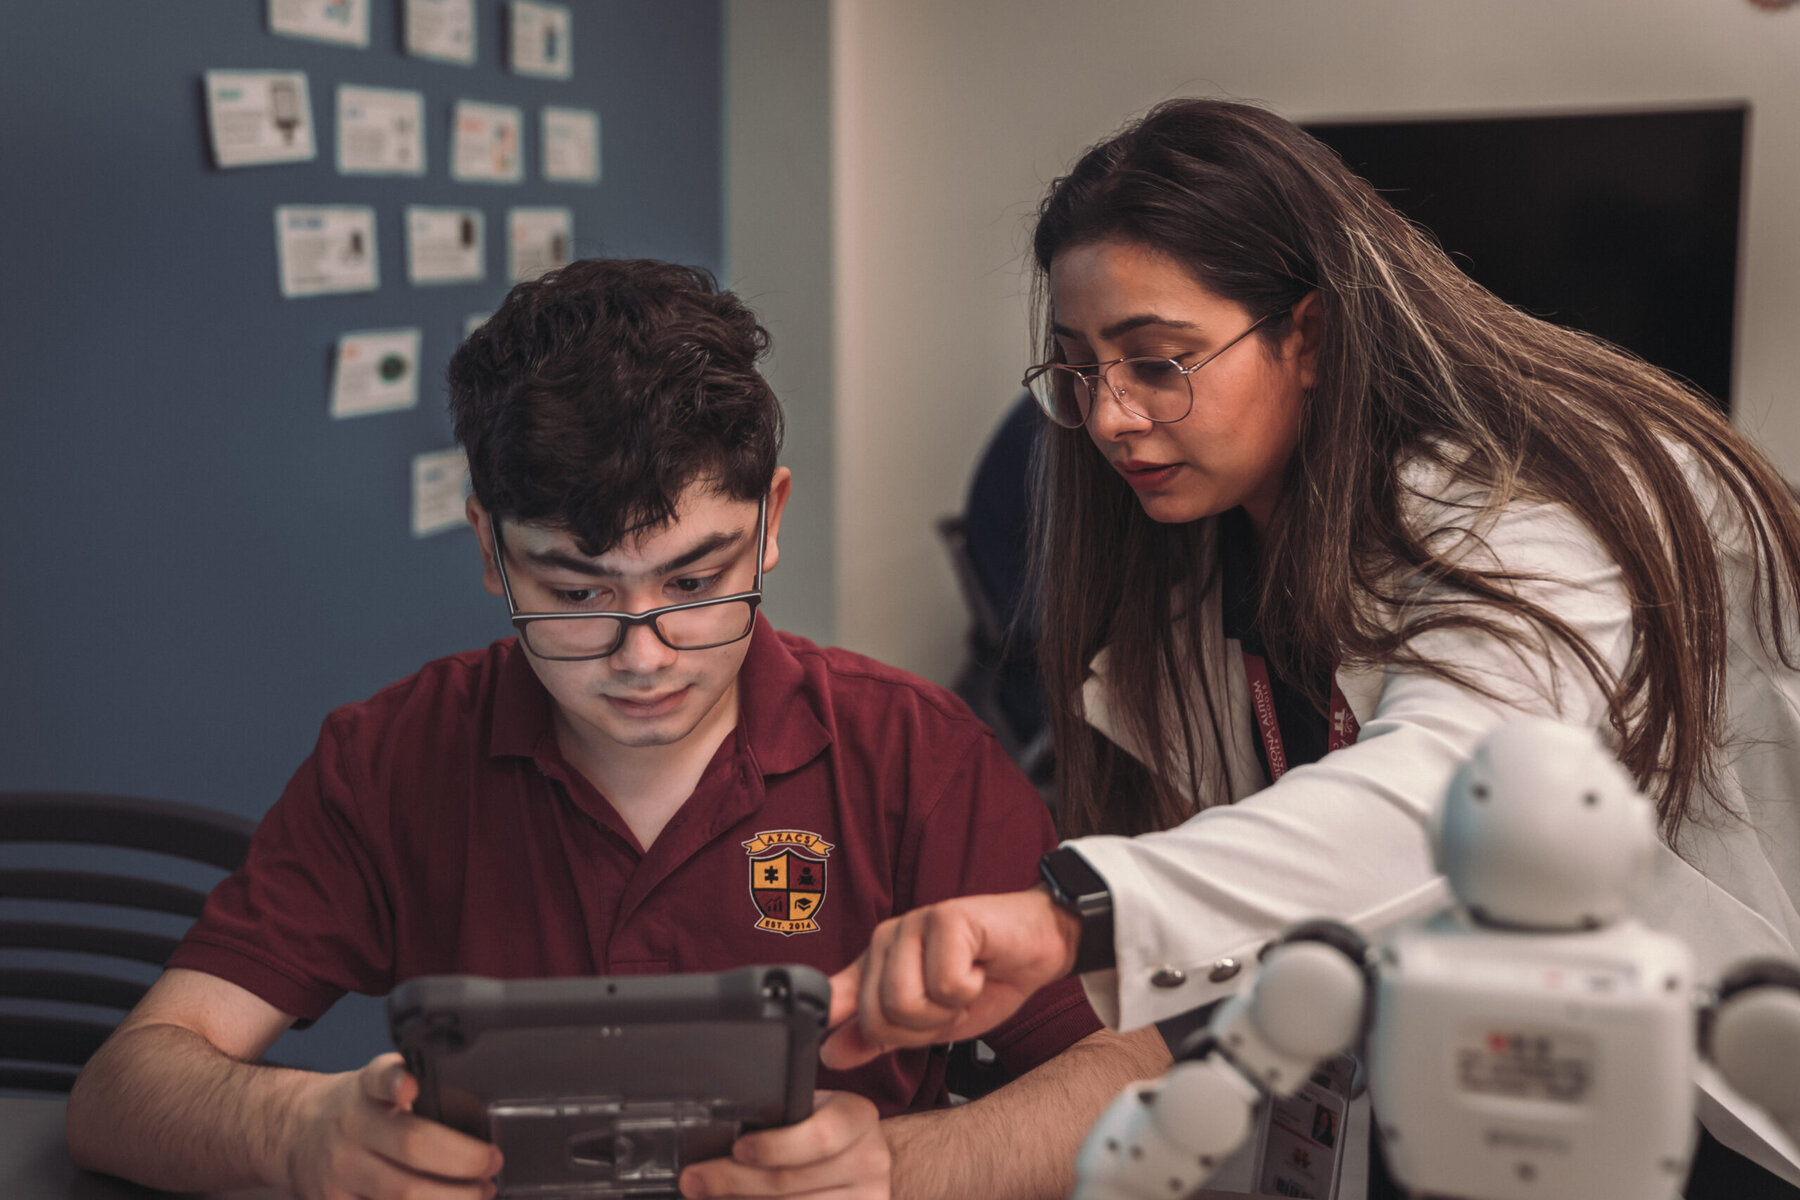 Supreet Kaur shows a high school student how to correctly use code to control the dancing robot as part of AZACS’ Woz ED curriculum.